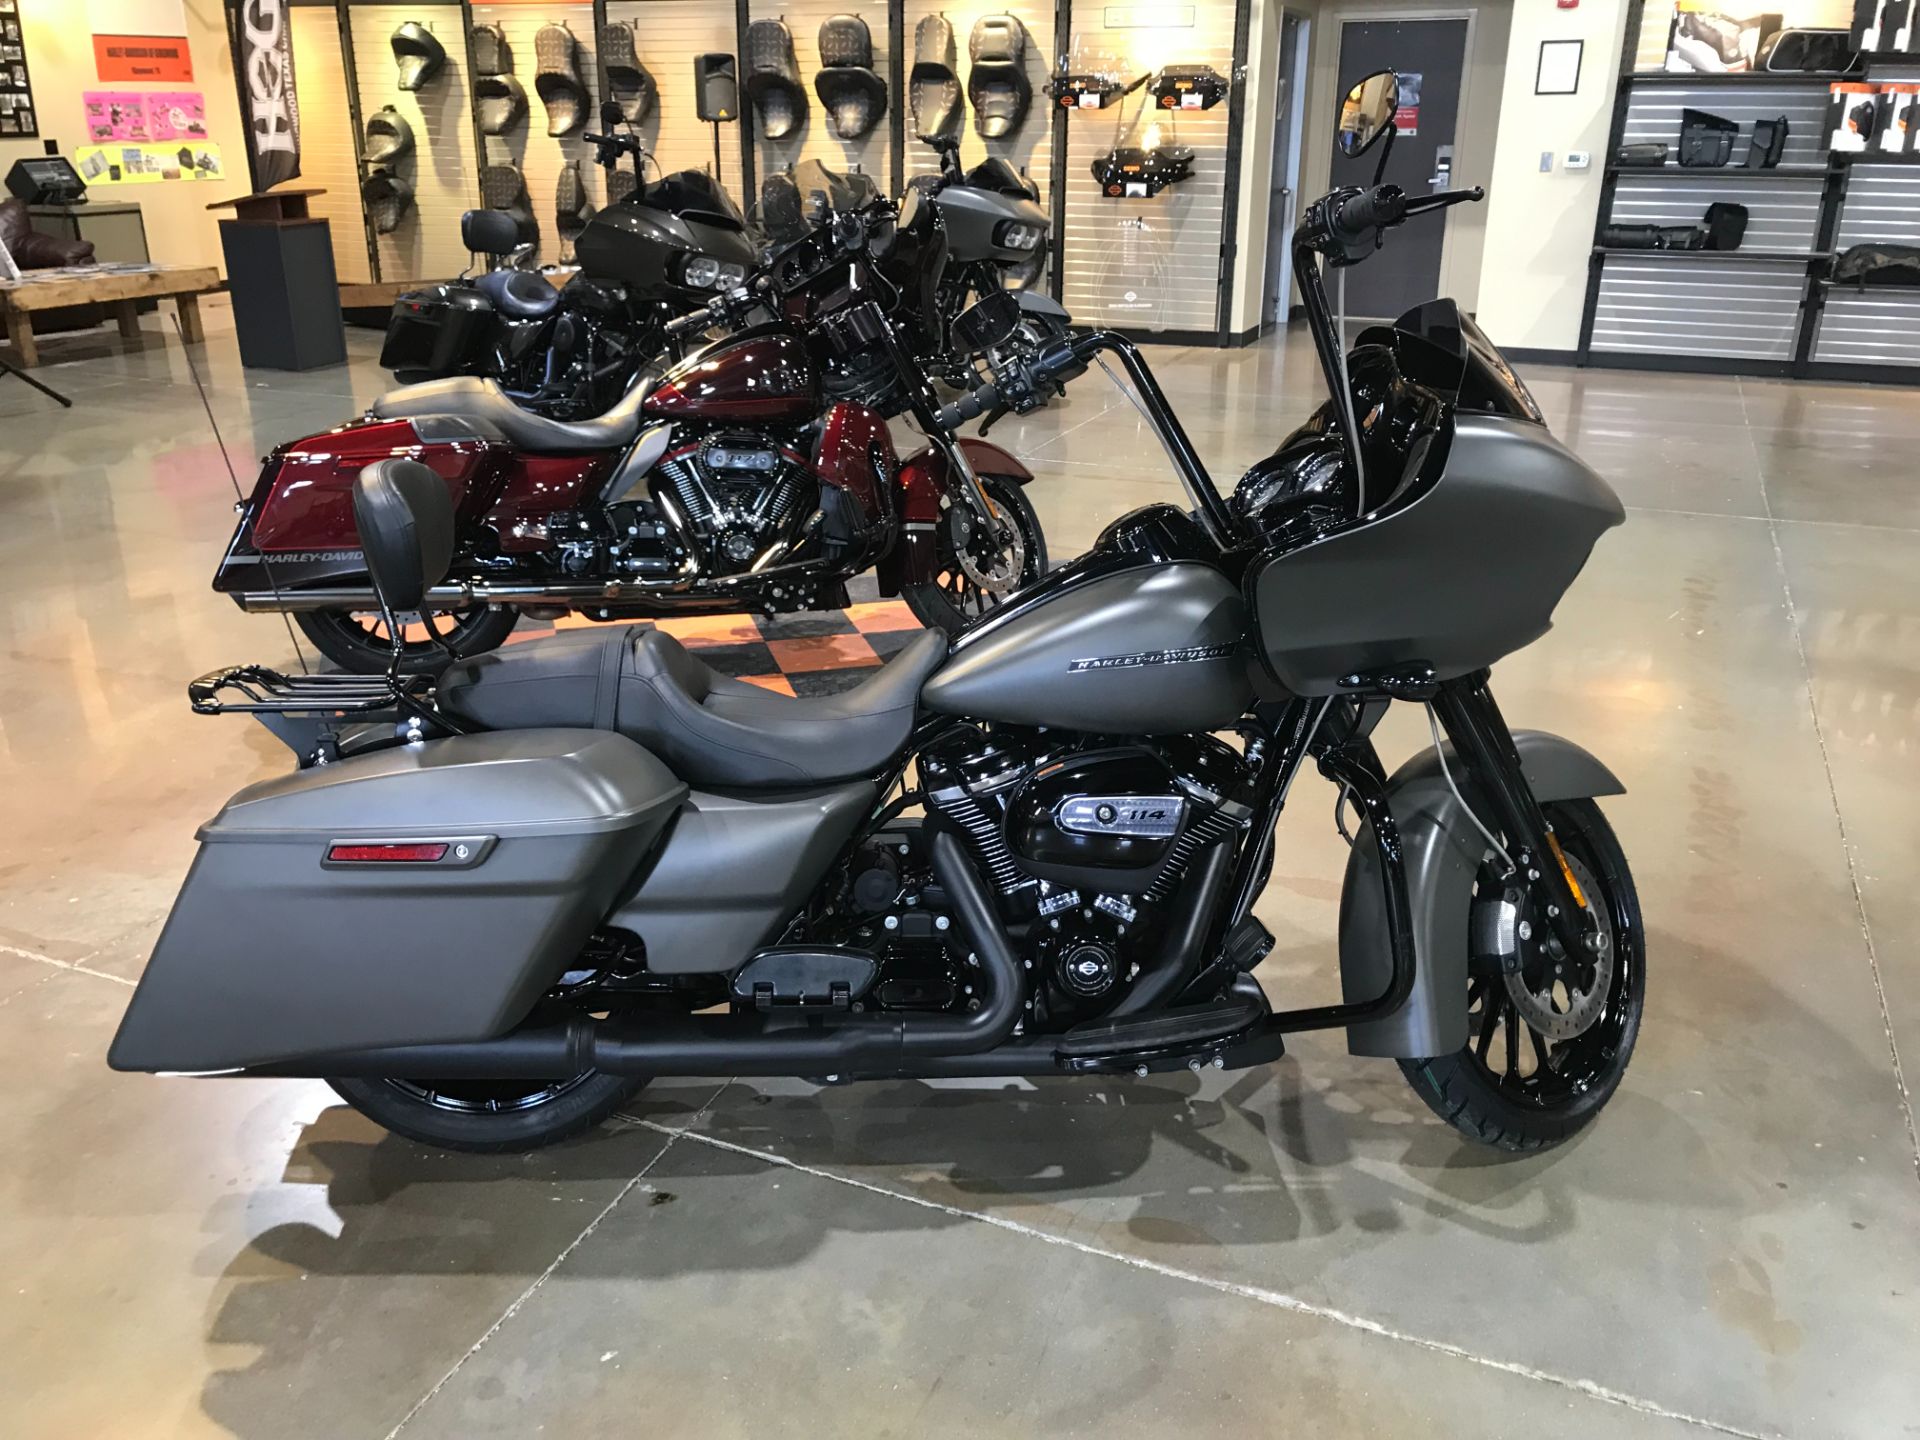 2019 Harley-Davidson Road Glide® Special in Kingwood, Texas - Photo 1